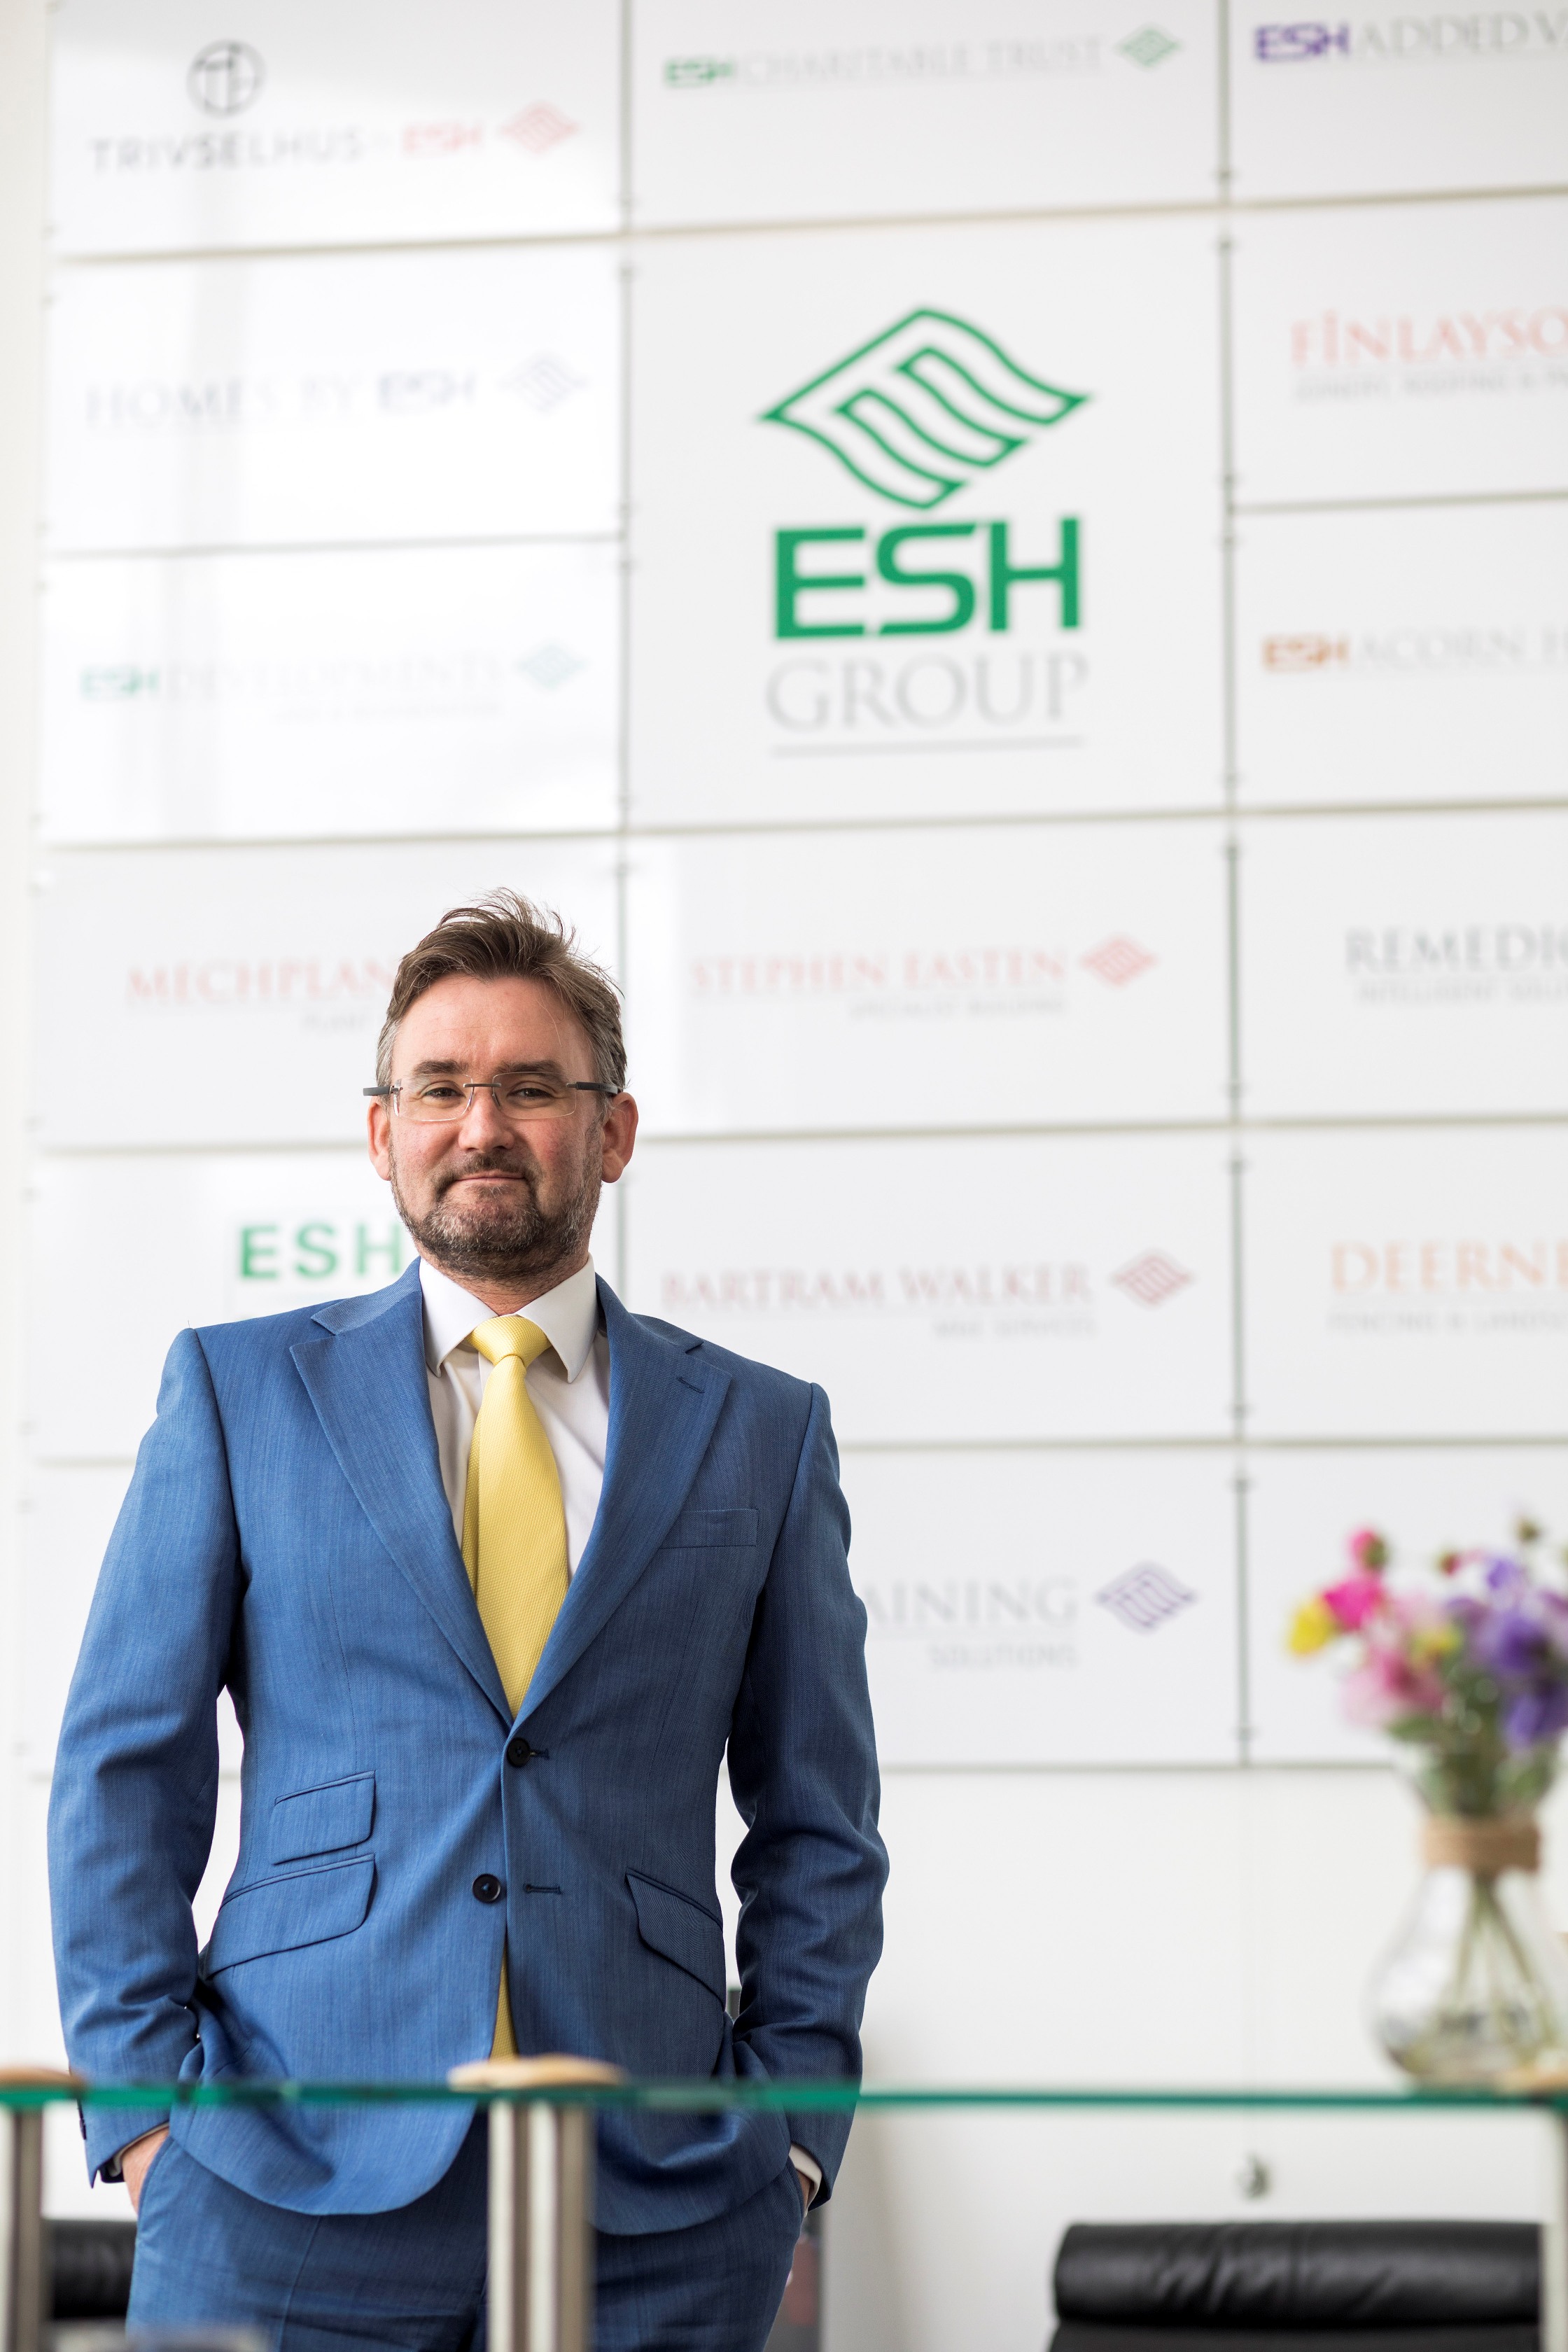 Esh Construction to deliver homes across North-east, Yorkshire and Humber through multi-billion delivery panel